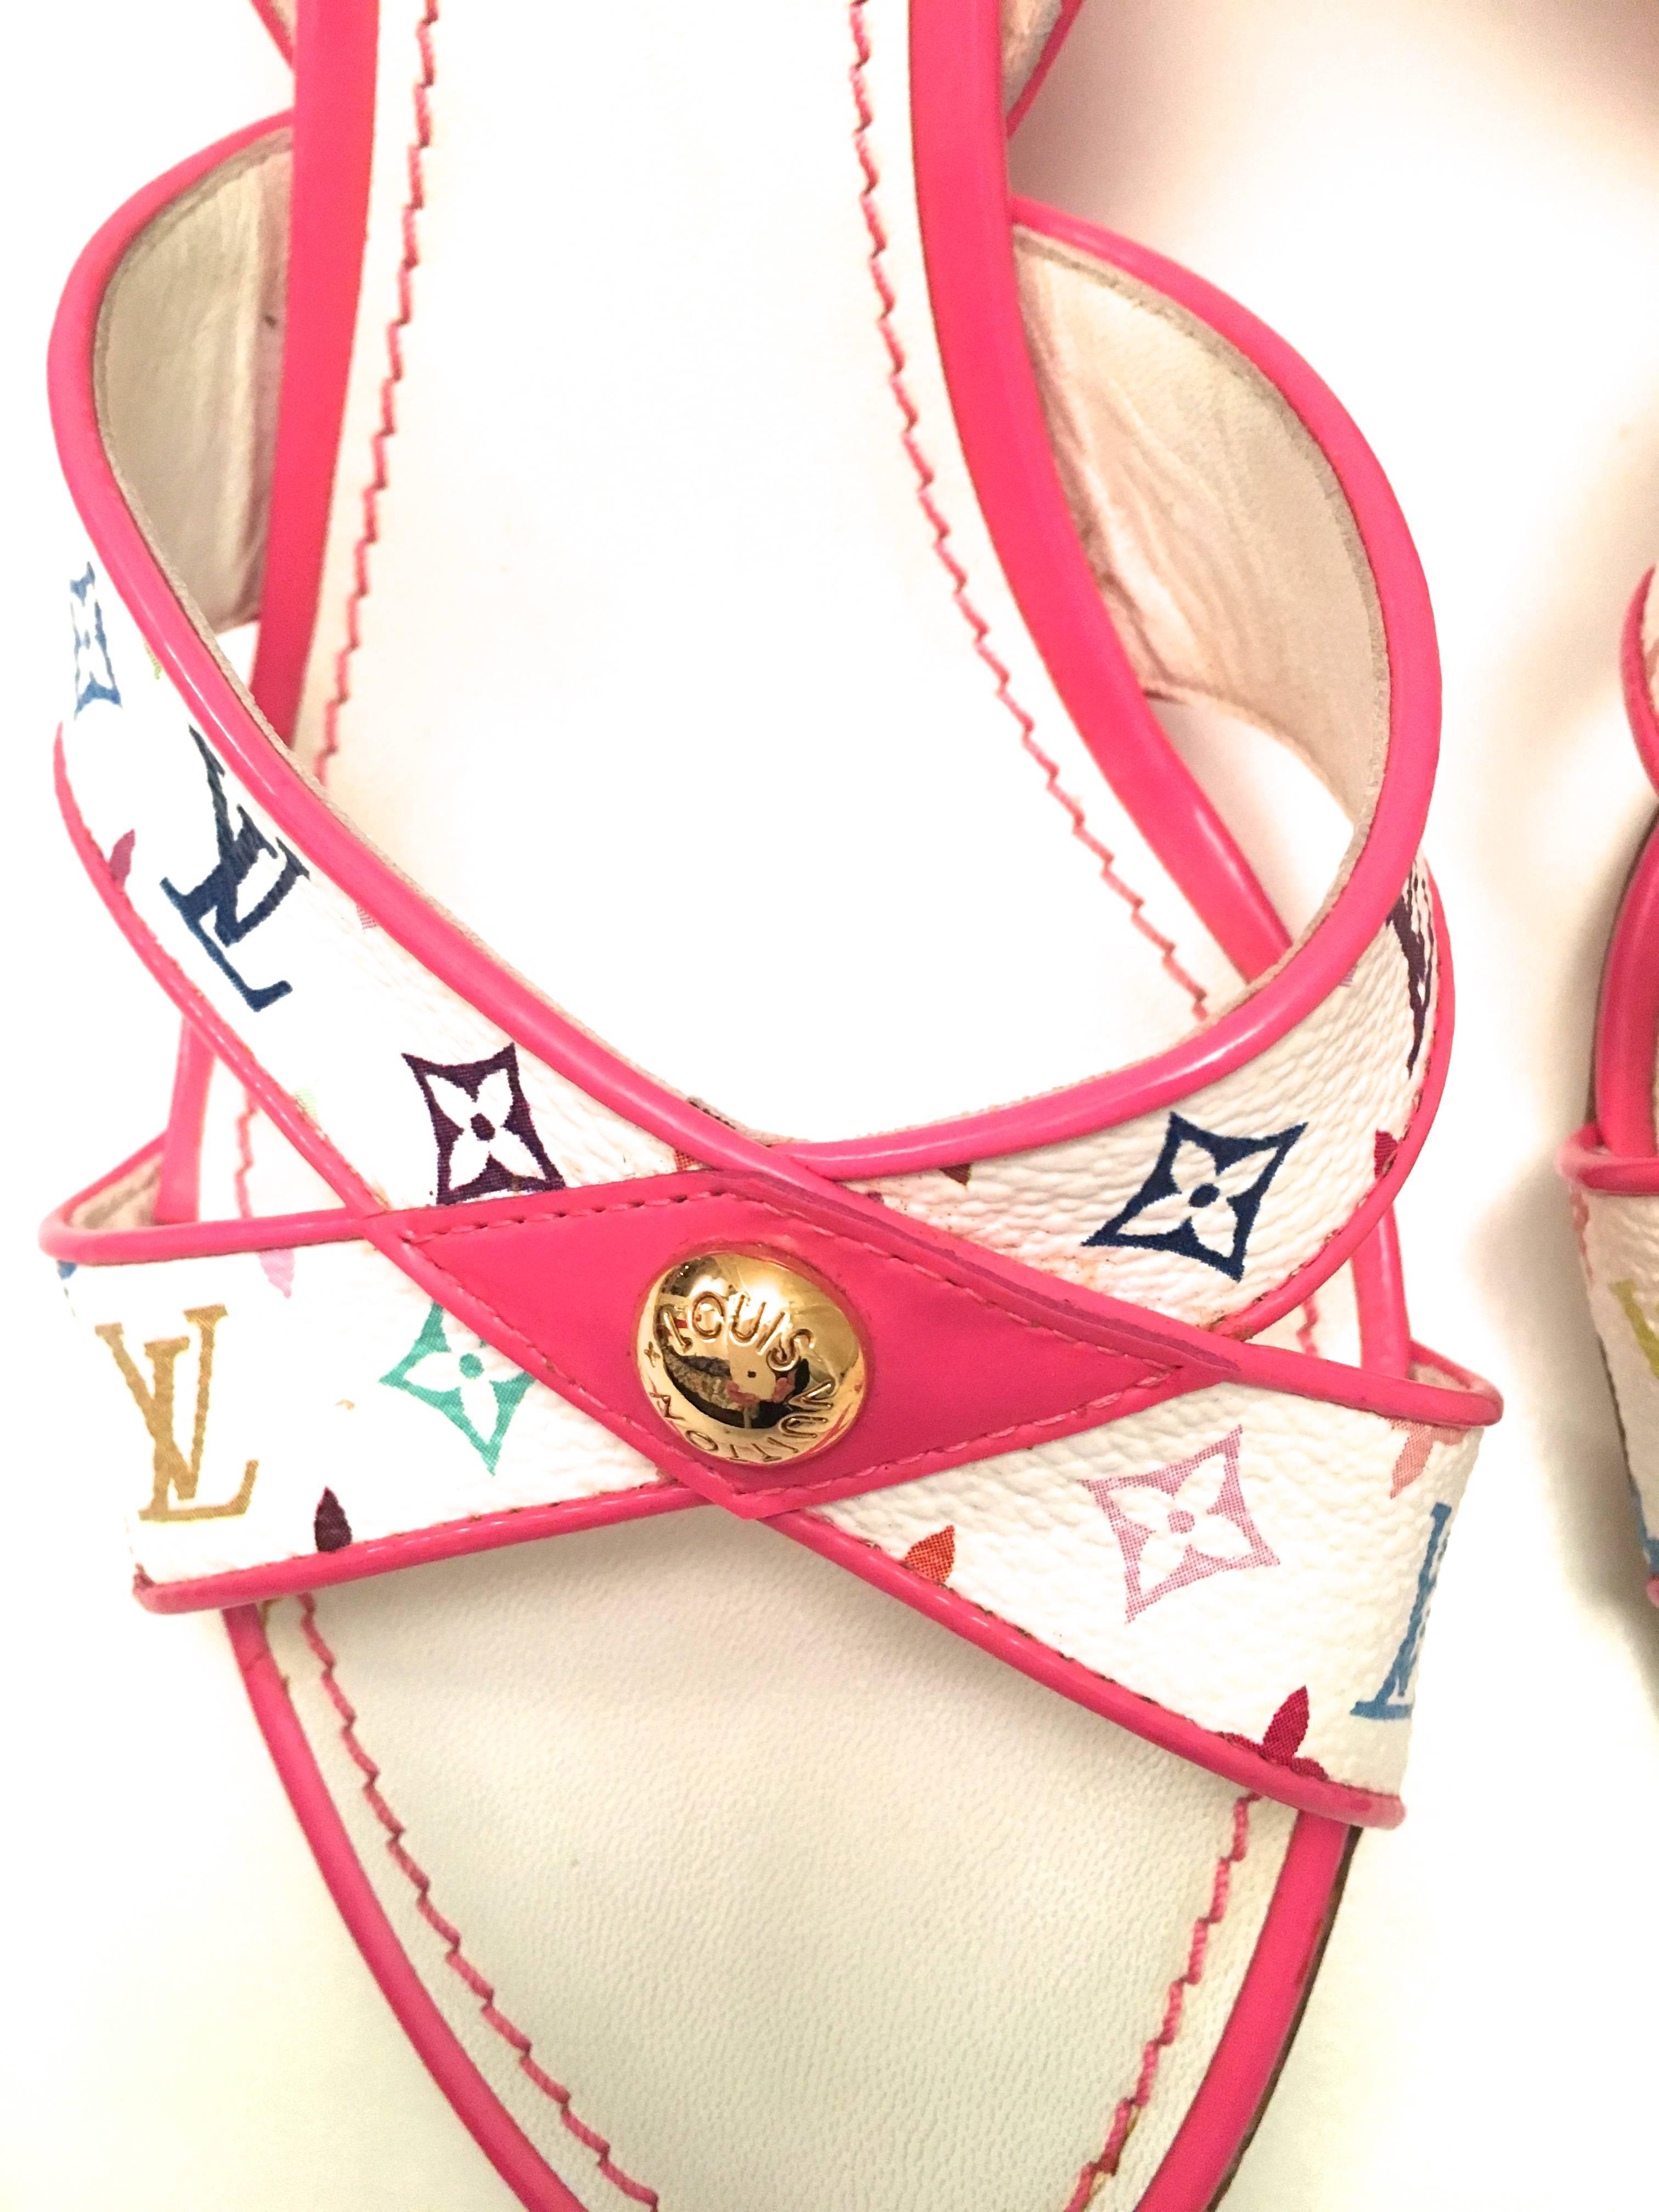 Presented here is a pair of Louis Vuitton wedges. This beautiful pair of shoes is a size 37.5. The wedges have a pink wedge with a sling back latch around the heel of each shoe with multiple size adjustments. Each shoes has the iconic monogram